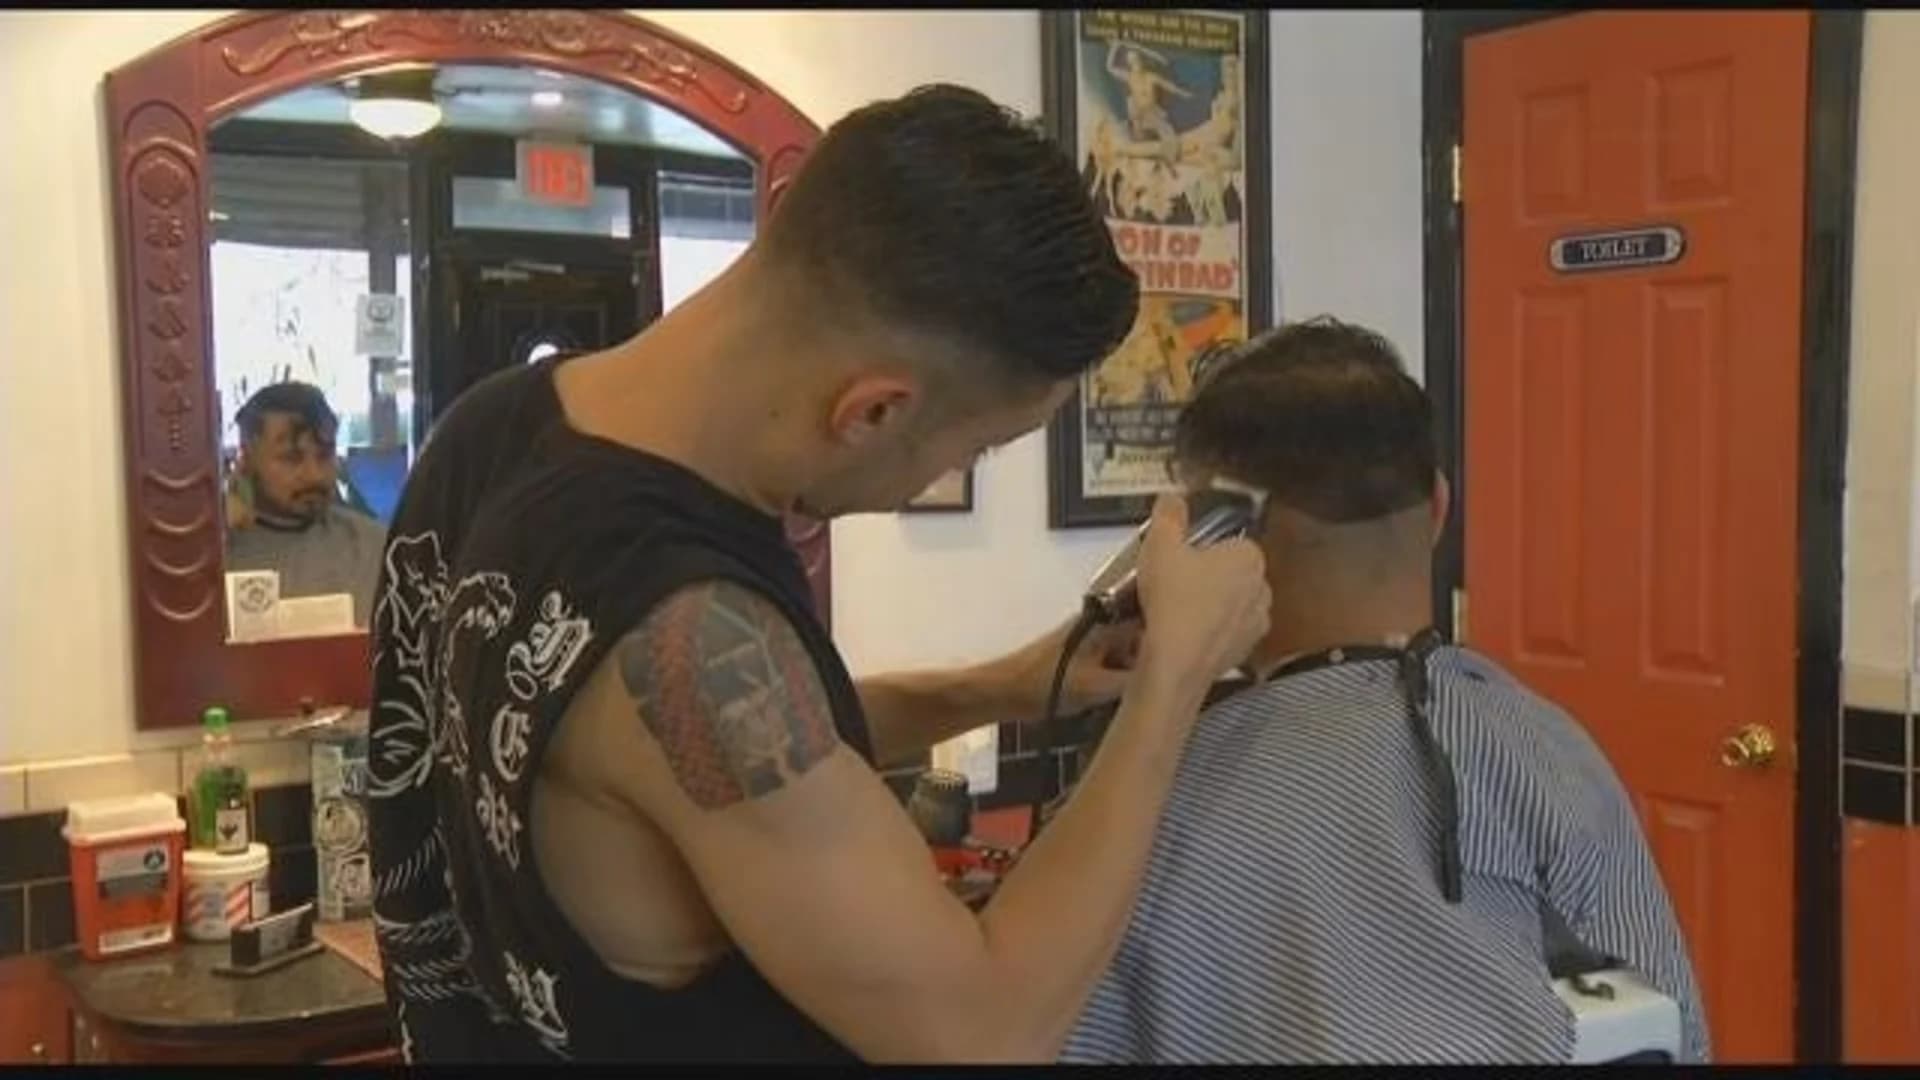 Brooklyn barber crafts top-of-the-line haircuts despite Tourette's diagnosis